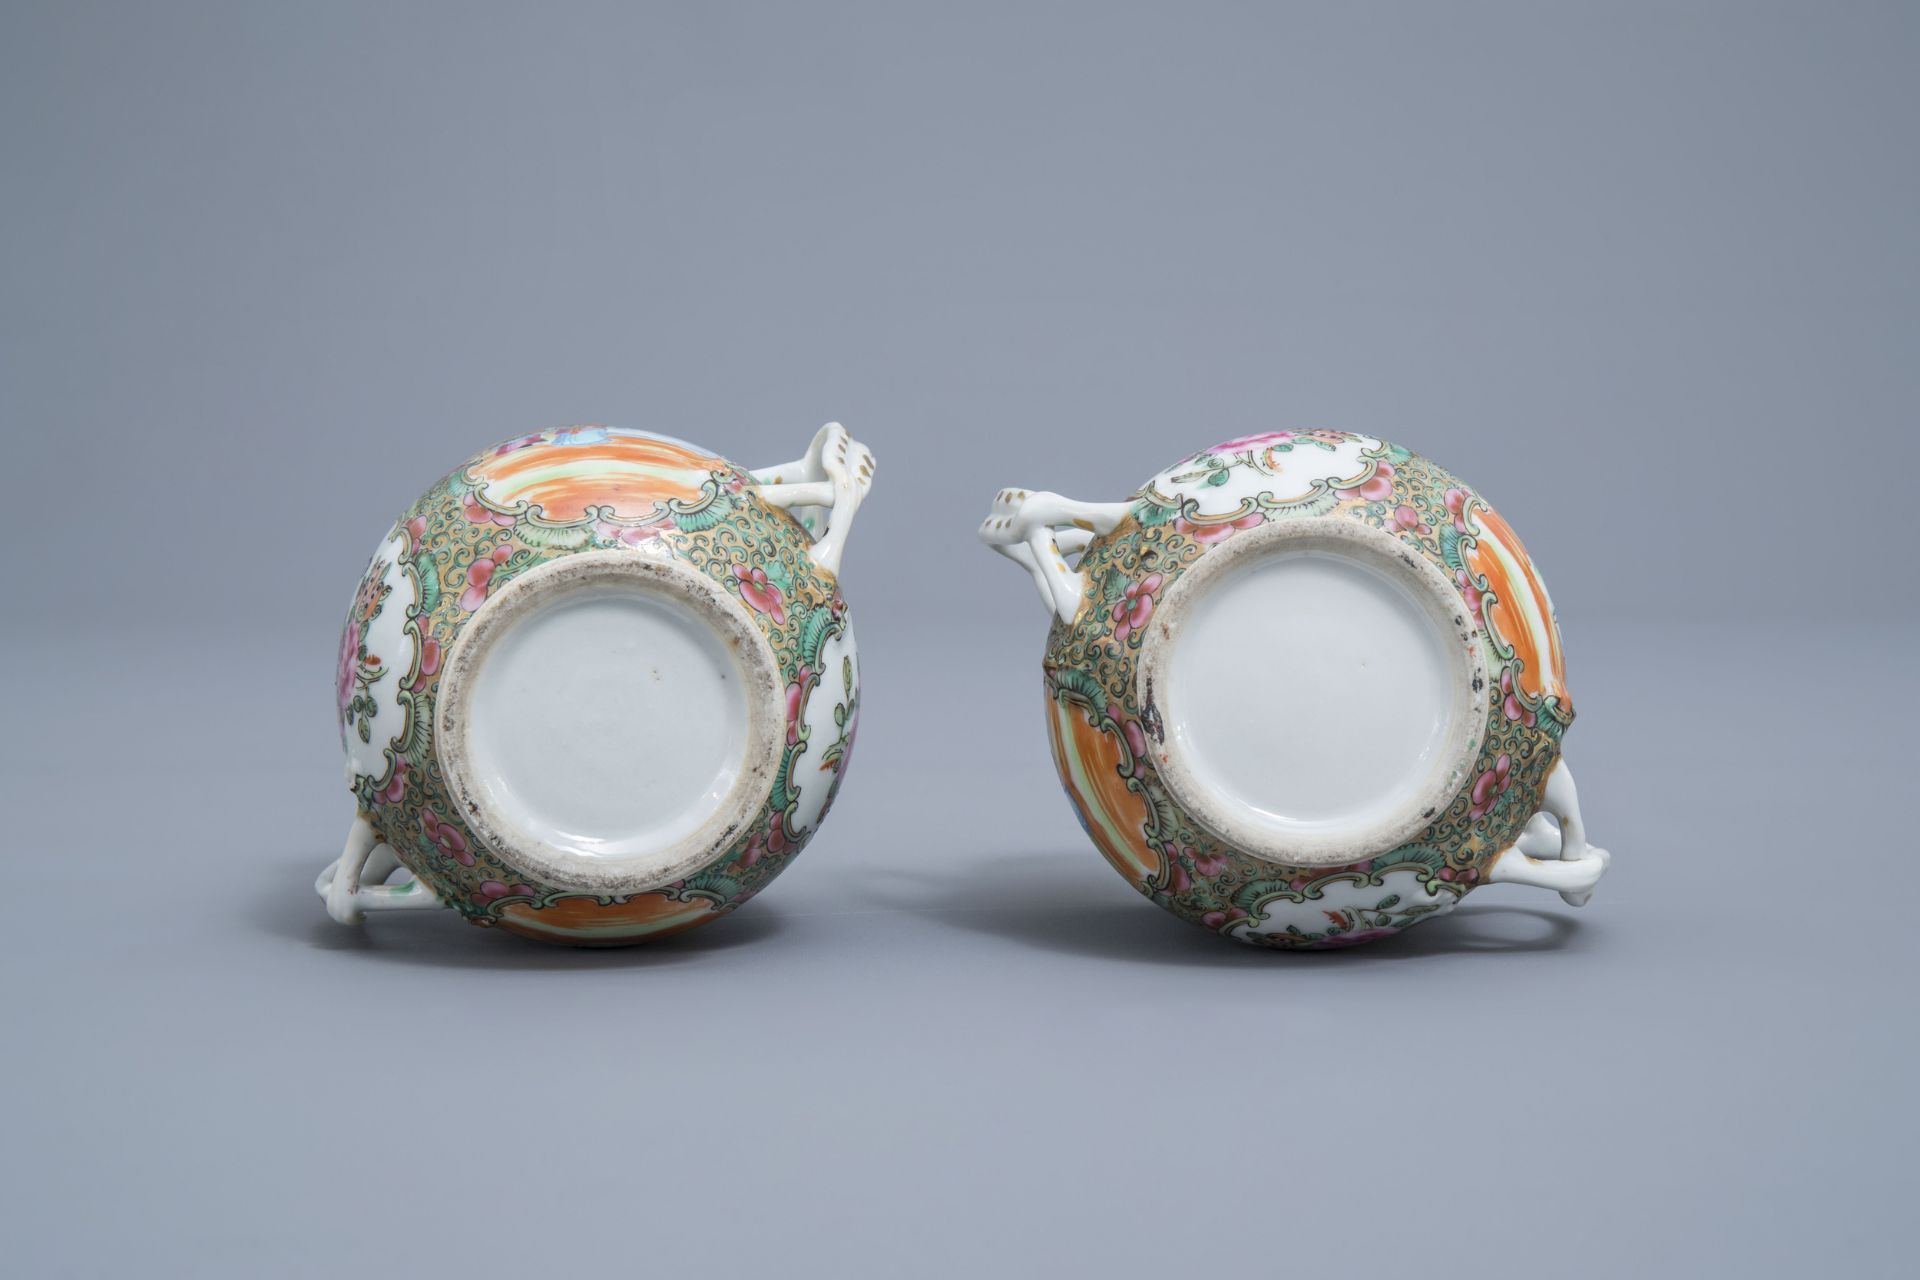 A varied collection of Chinse Canton and famille rose porcelain, 19th C. - Image 13 of 19